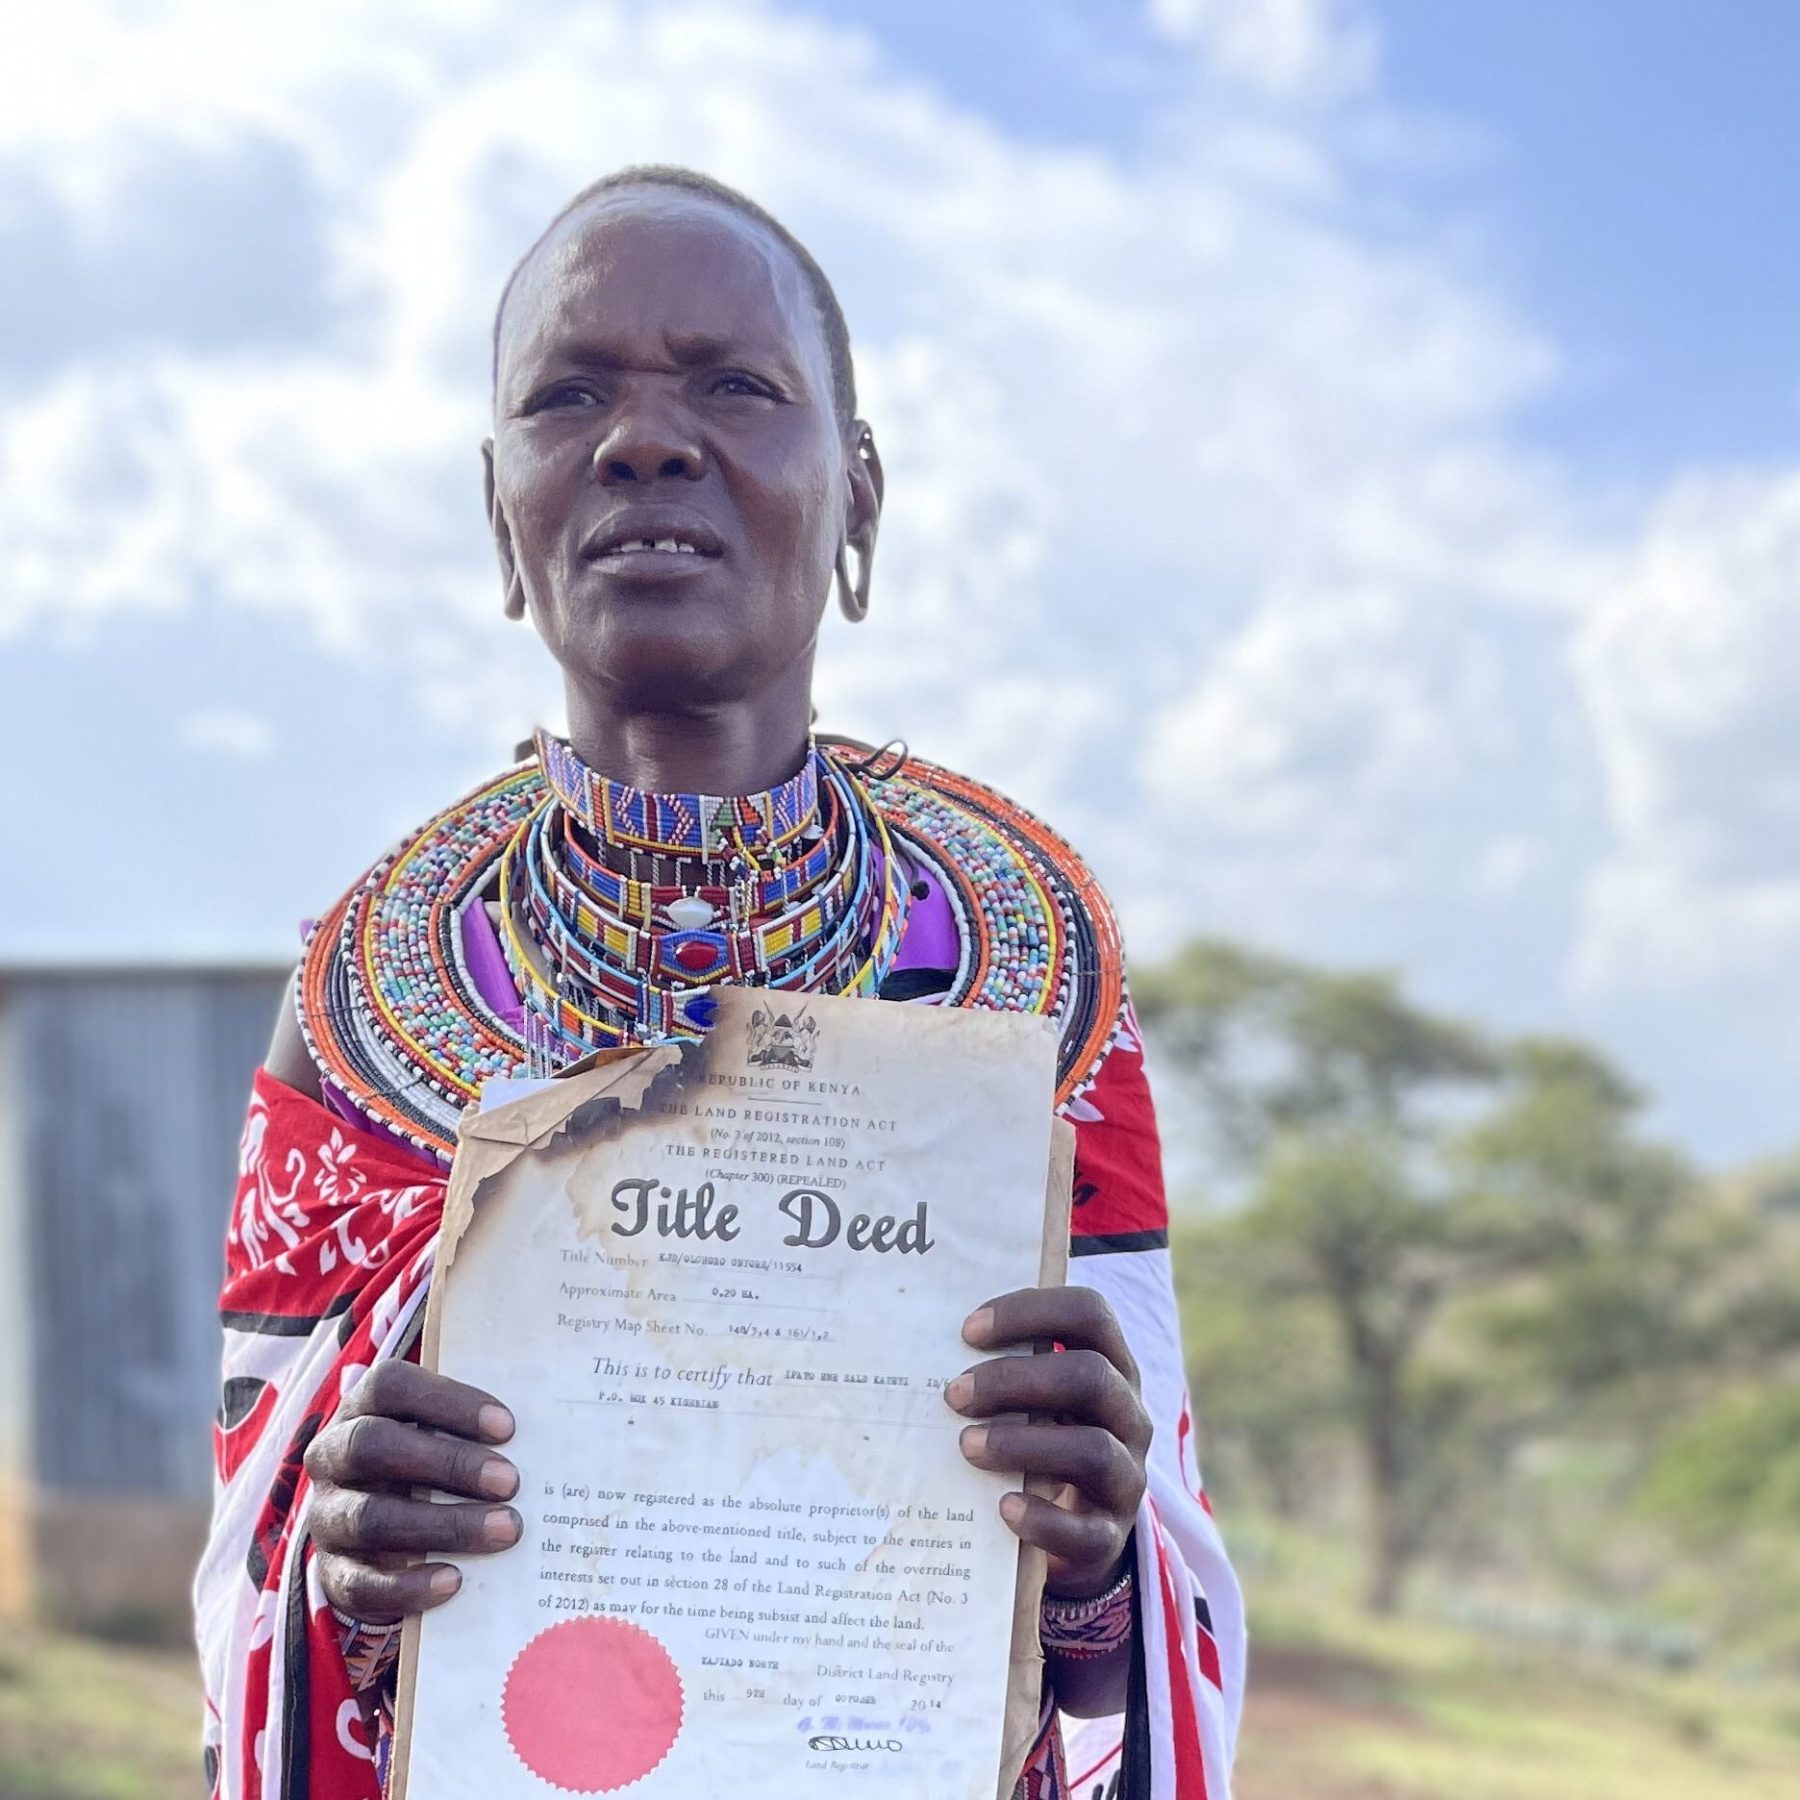 Lost In The Cloud Ch 57 From being property to owning one: A Maasai woman's struggle for land |  Features | Al Jazeera